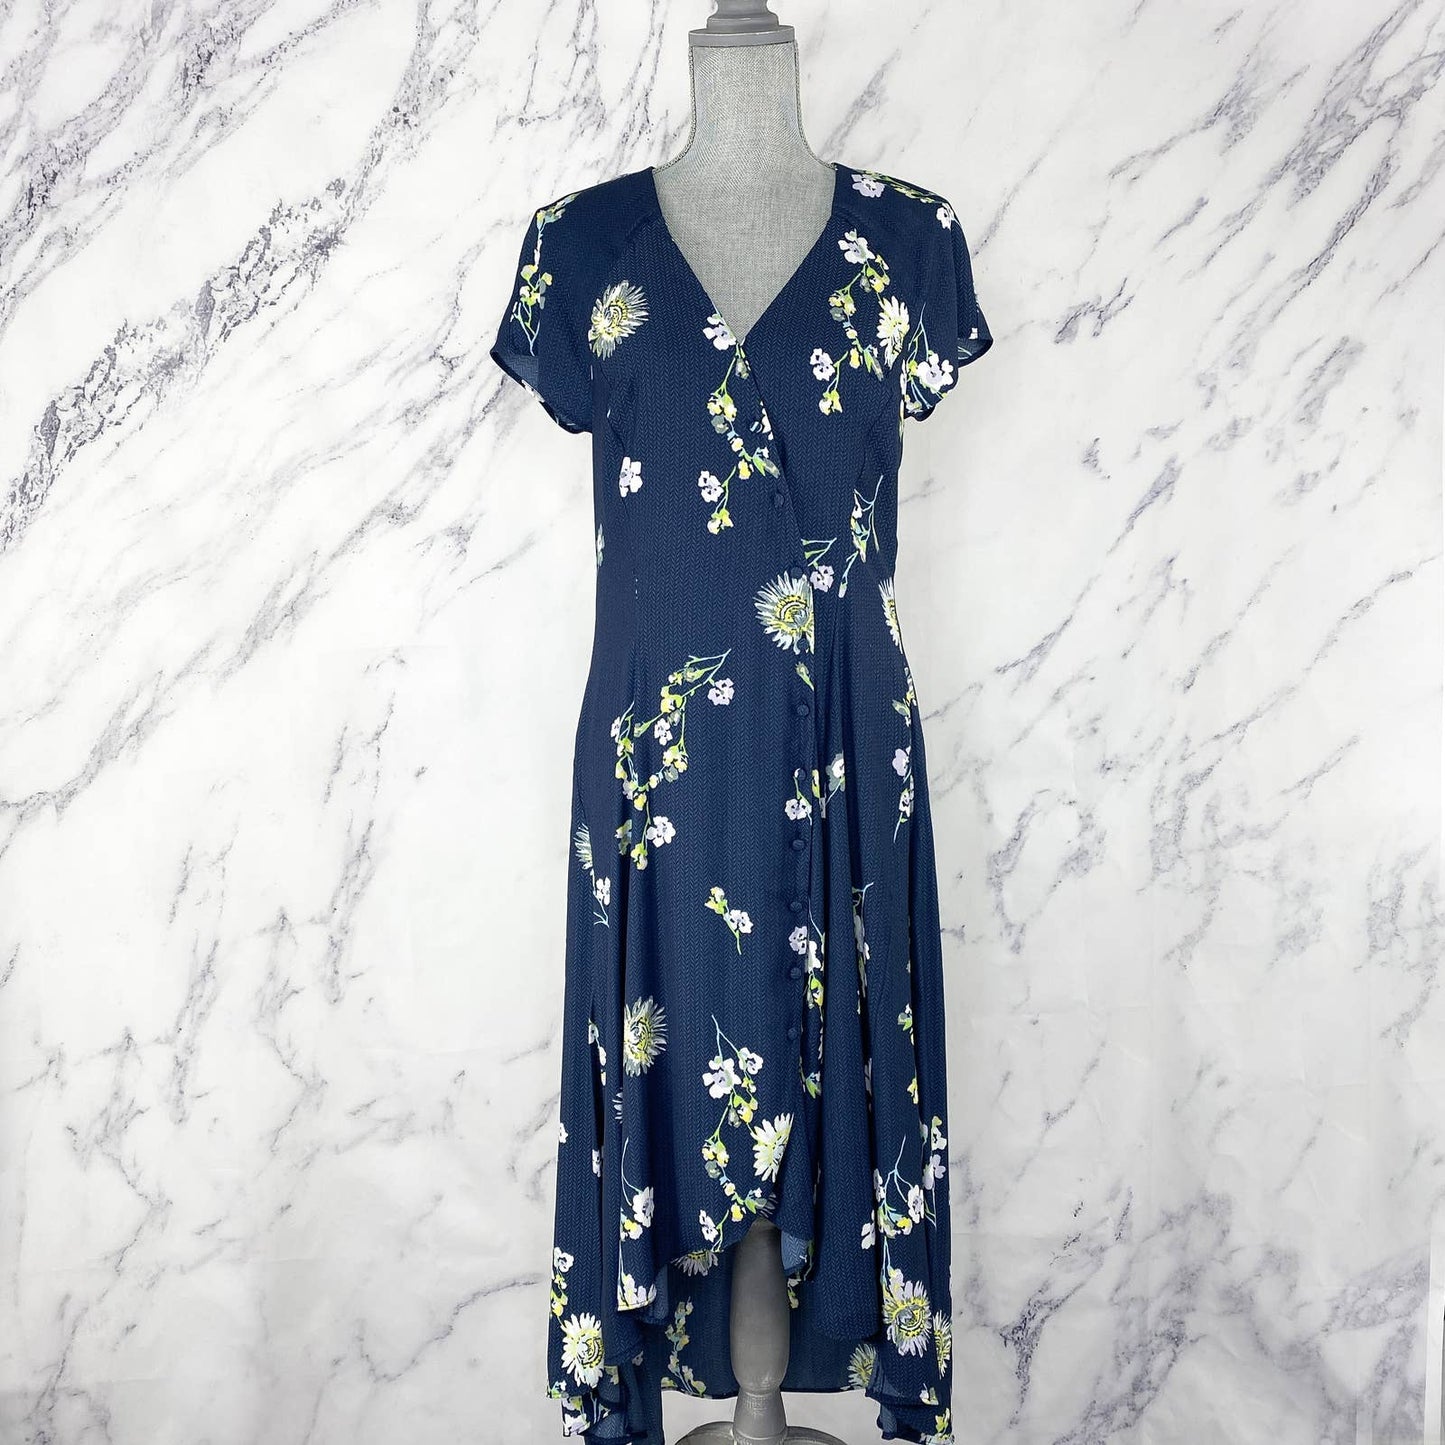 Free People | Lost in You Floral Maxi Dress | Sz S